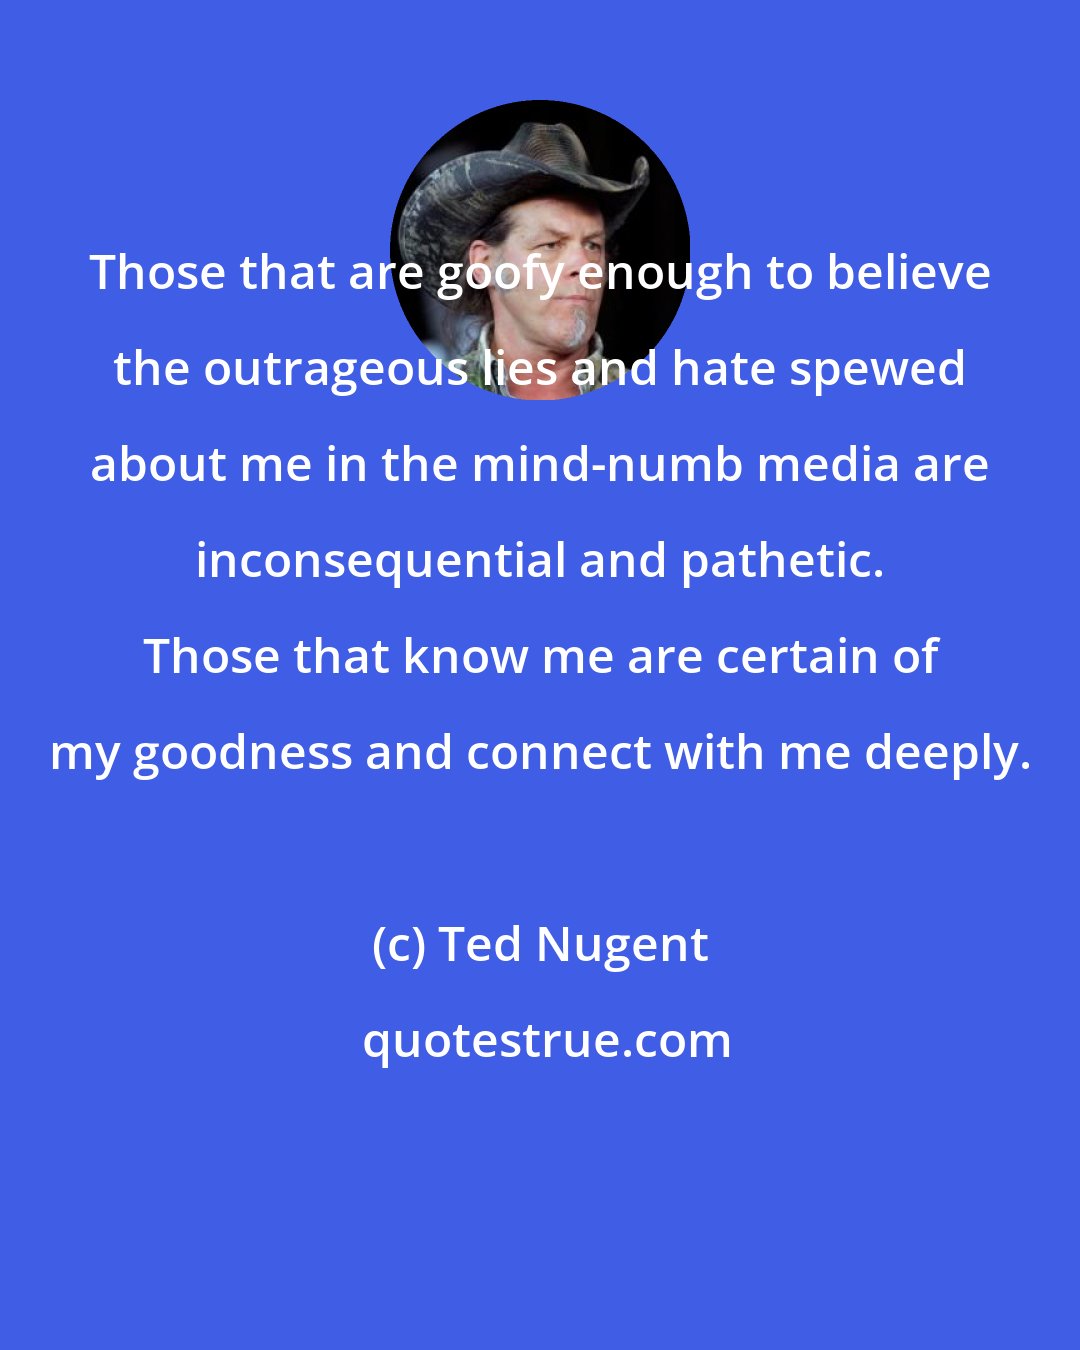 Ted Nugent: Those that are goofy enough to believe the outrageous lies and hate spewed about me in the mind-numb media are inconsequential and pathetic. Those that know me are certain of my goodness and connect with me deeply.